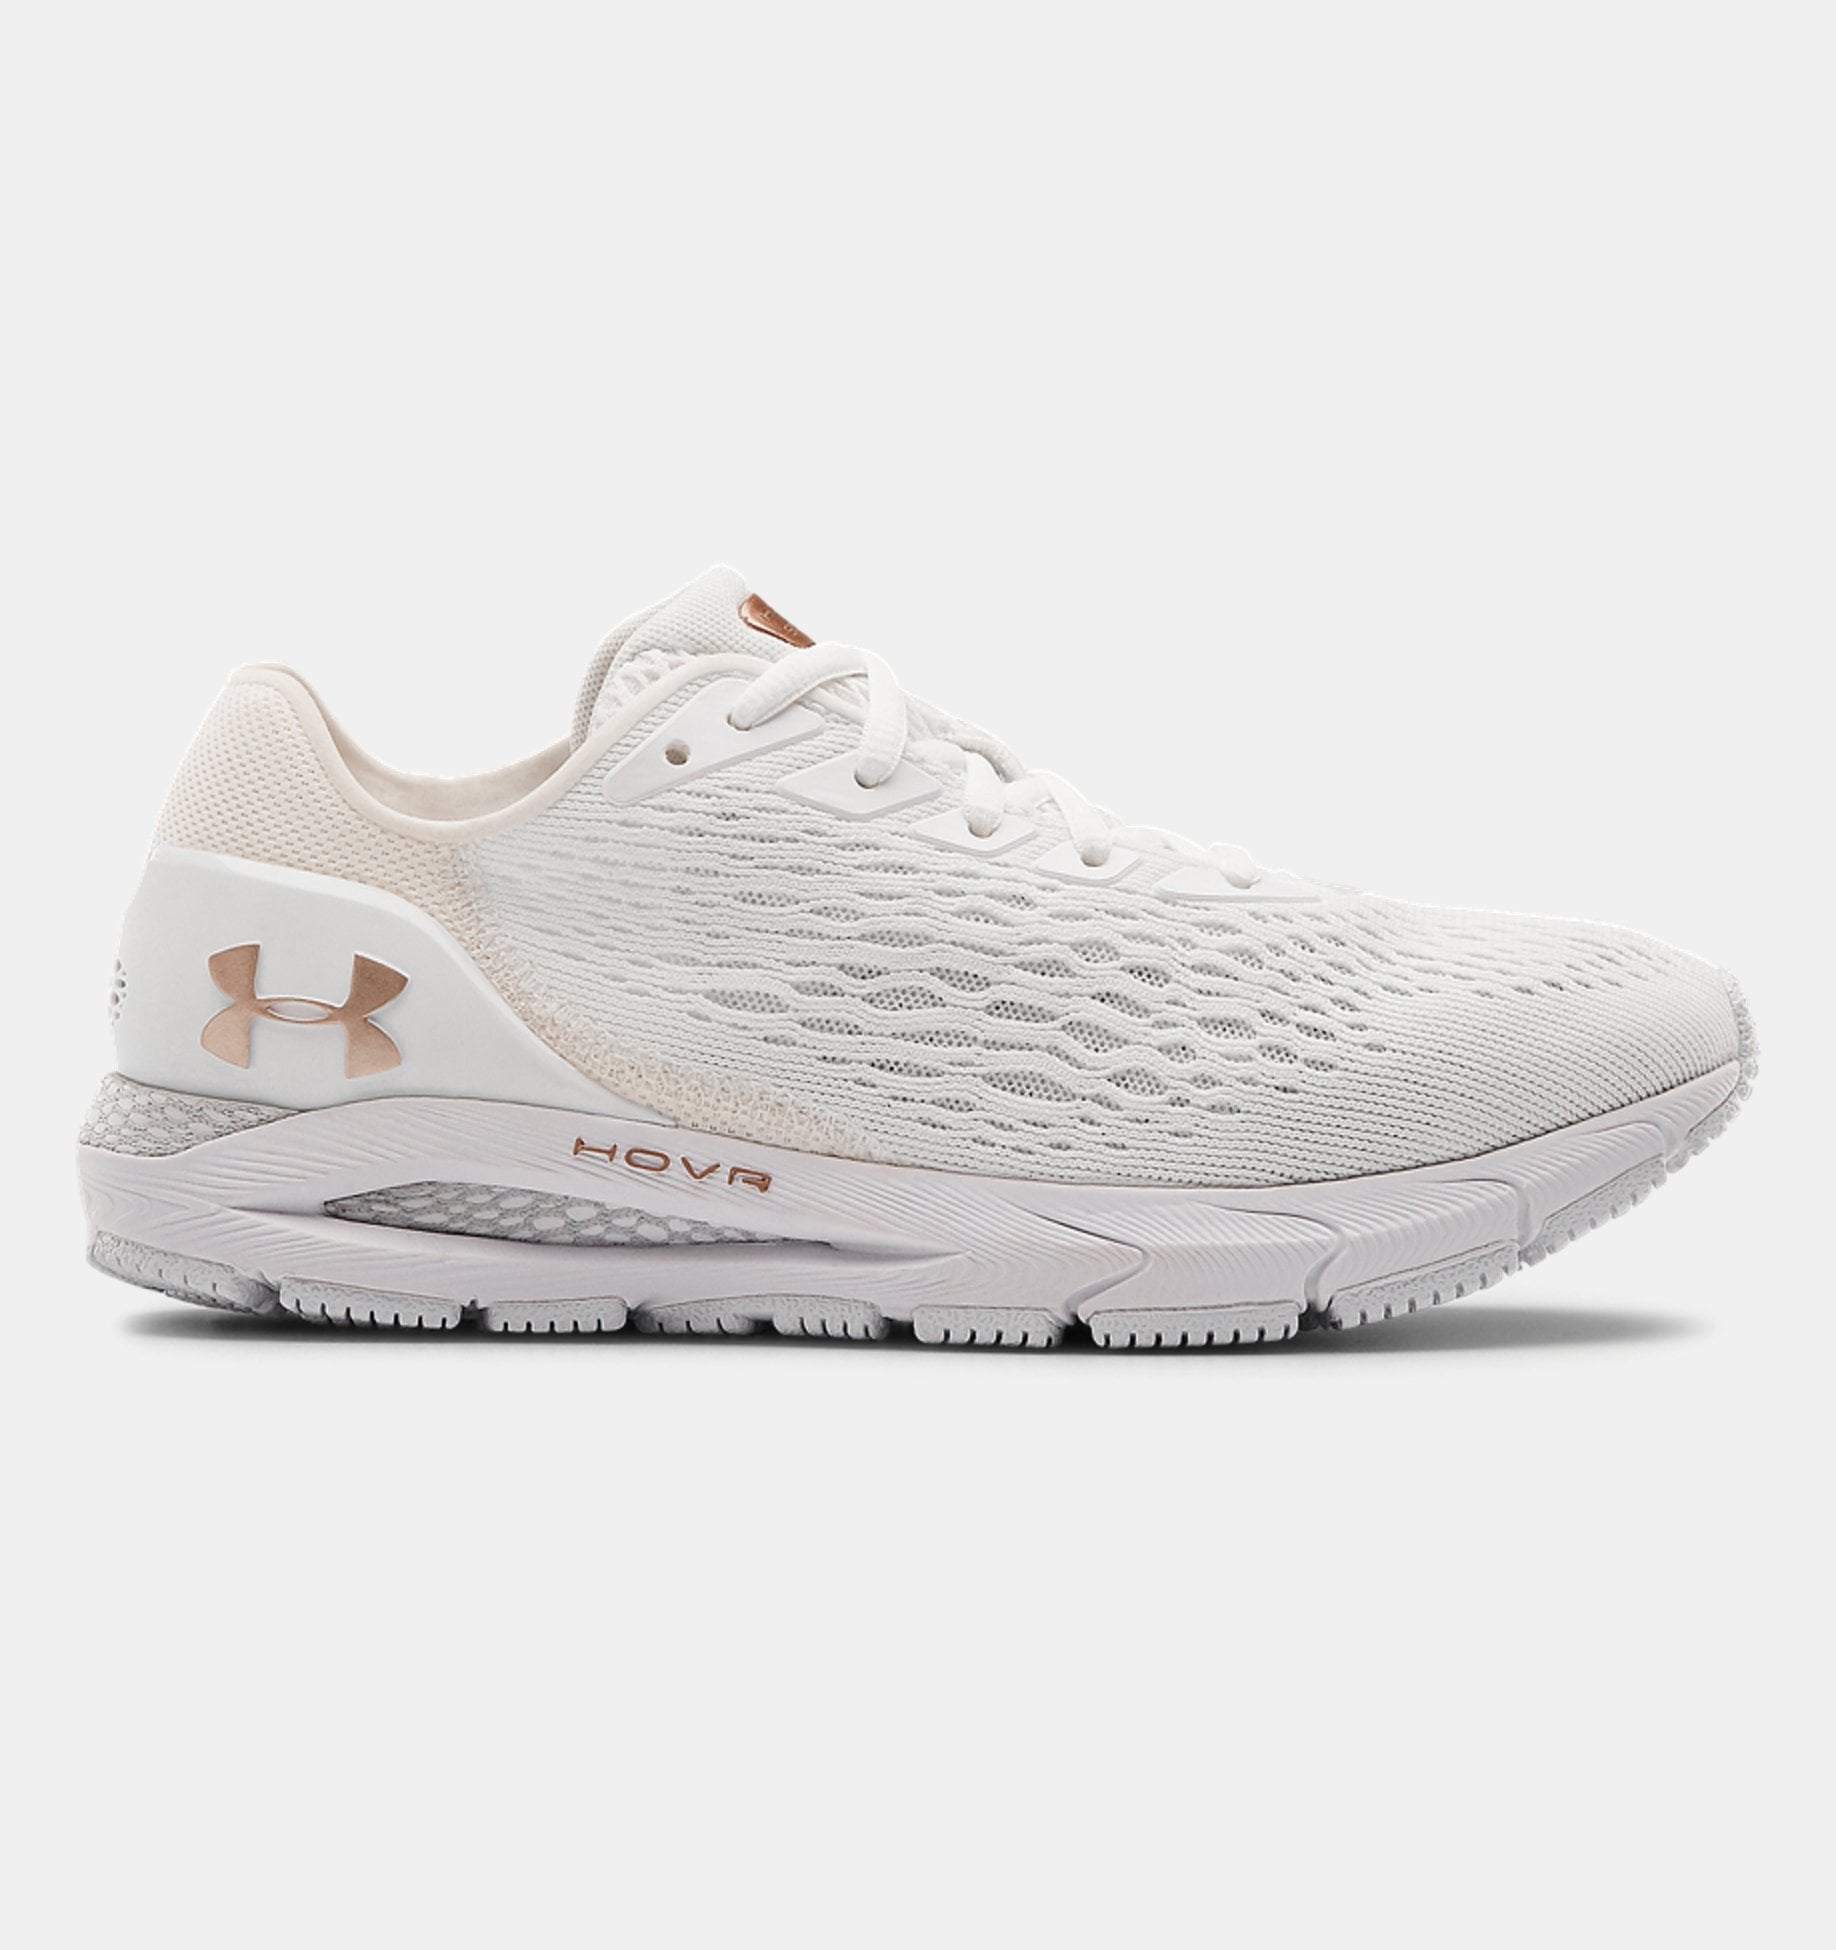 Under Armour Walking Shoes That Add Support and Comfort | POPSUGAR Fitness